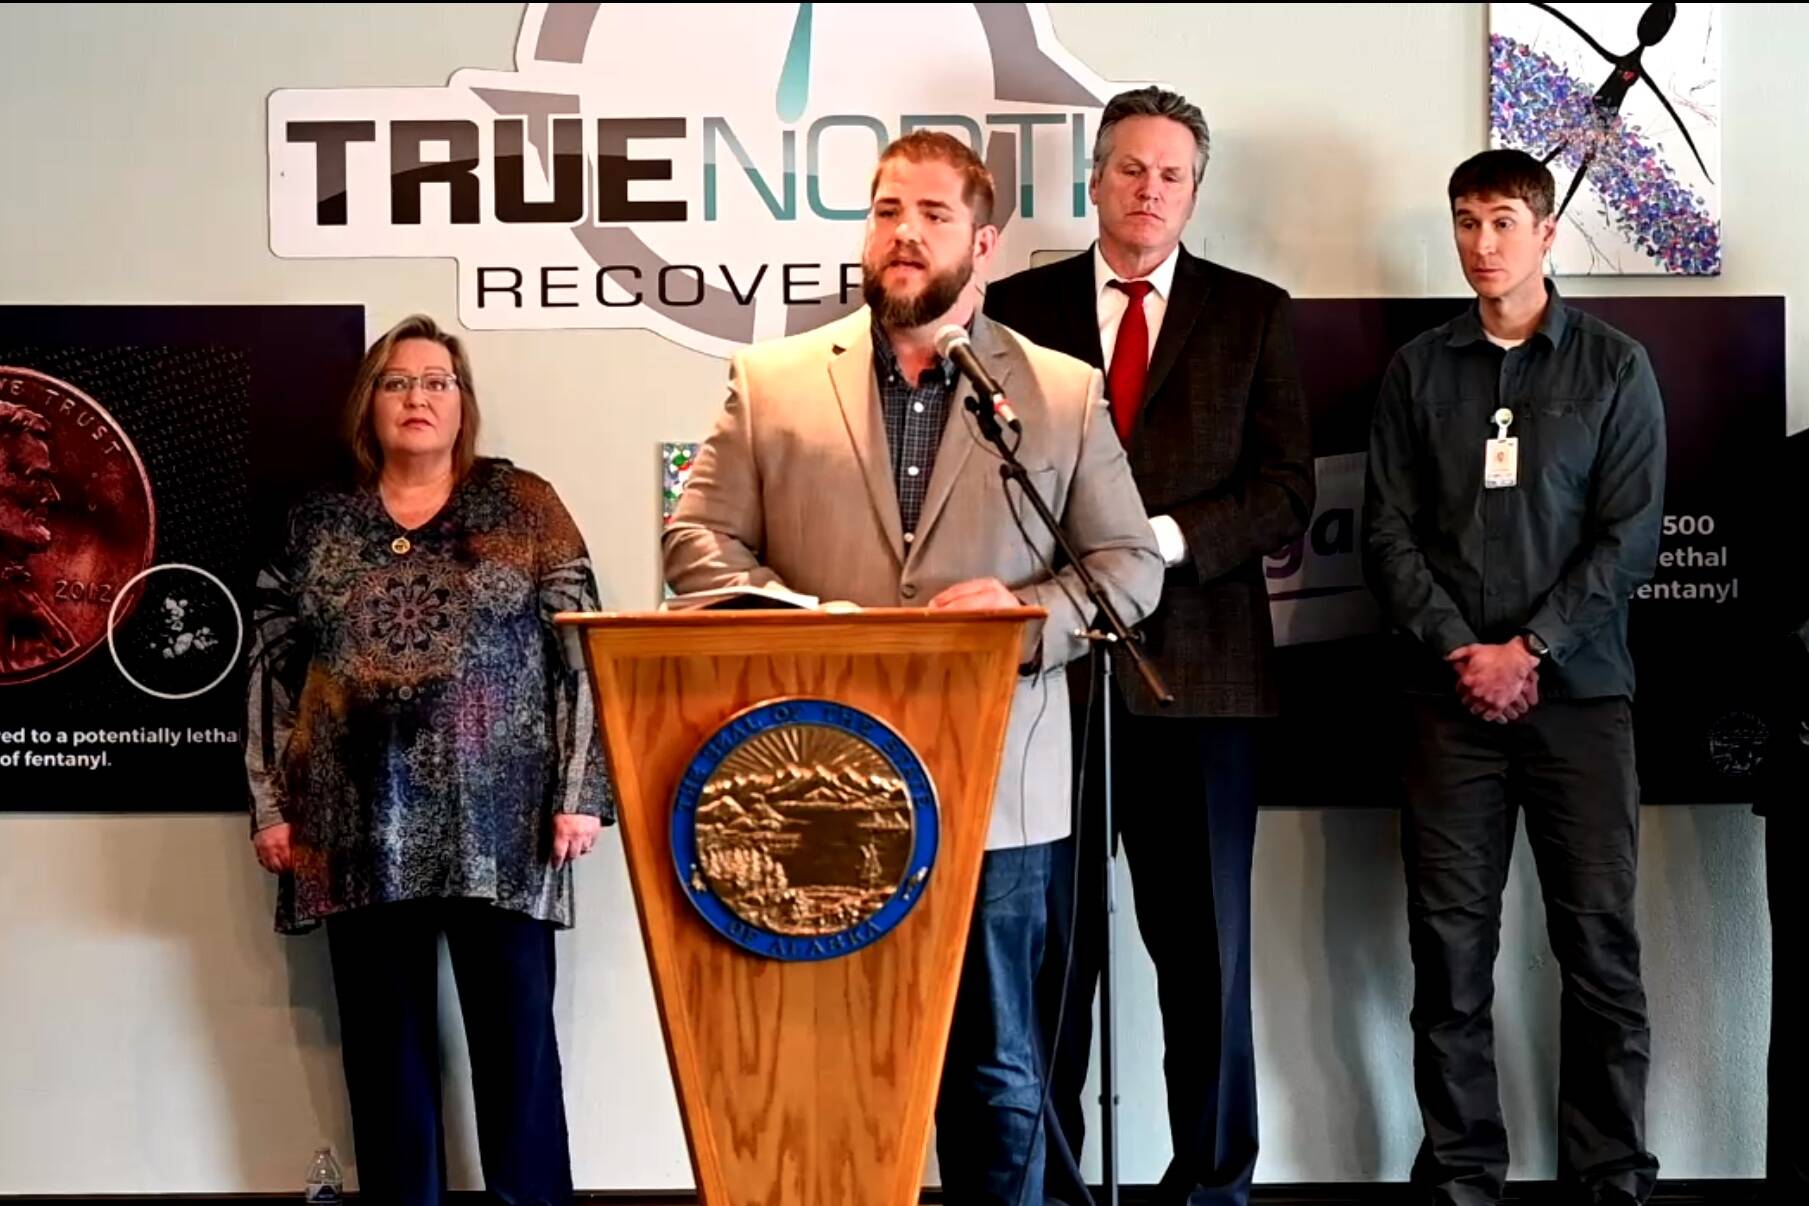 Screenshot 
Department of Health and Social Services Commissioner Adam Crum, speaks at a news conference with Gov. Mike Dunleavy about the state’s efforts to combat the increase in drug overdoses driven by the synthetic opioid fentanyl, on Tuesday, May 3, 2022.